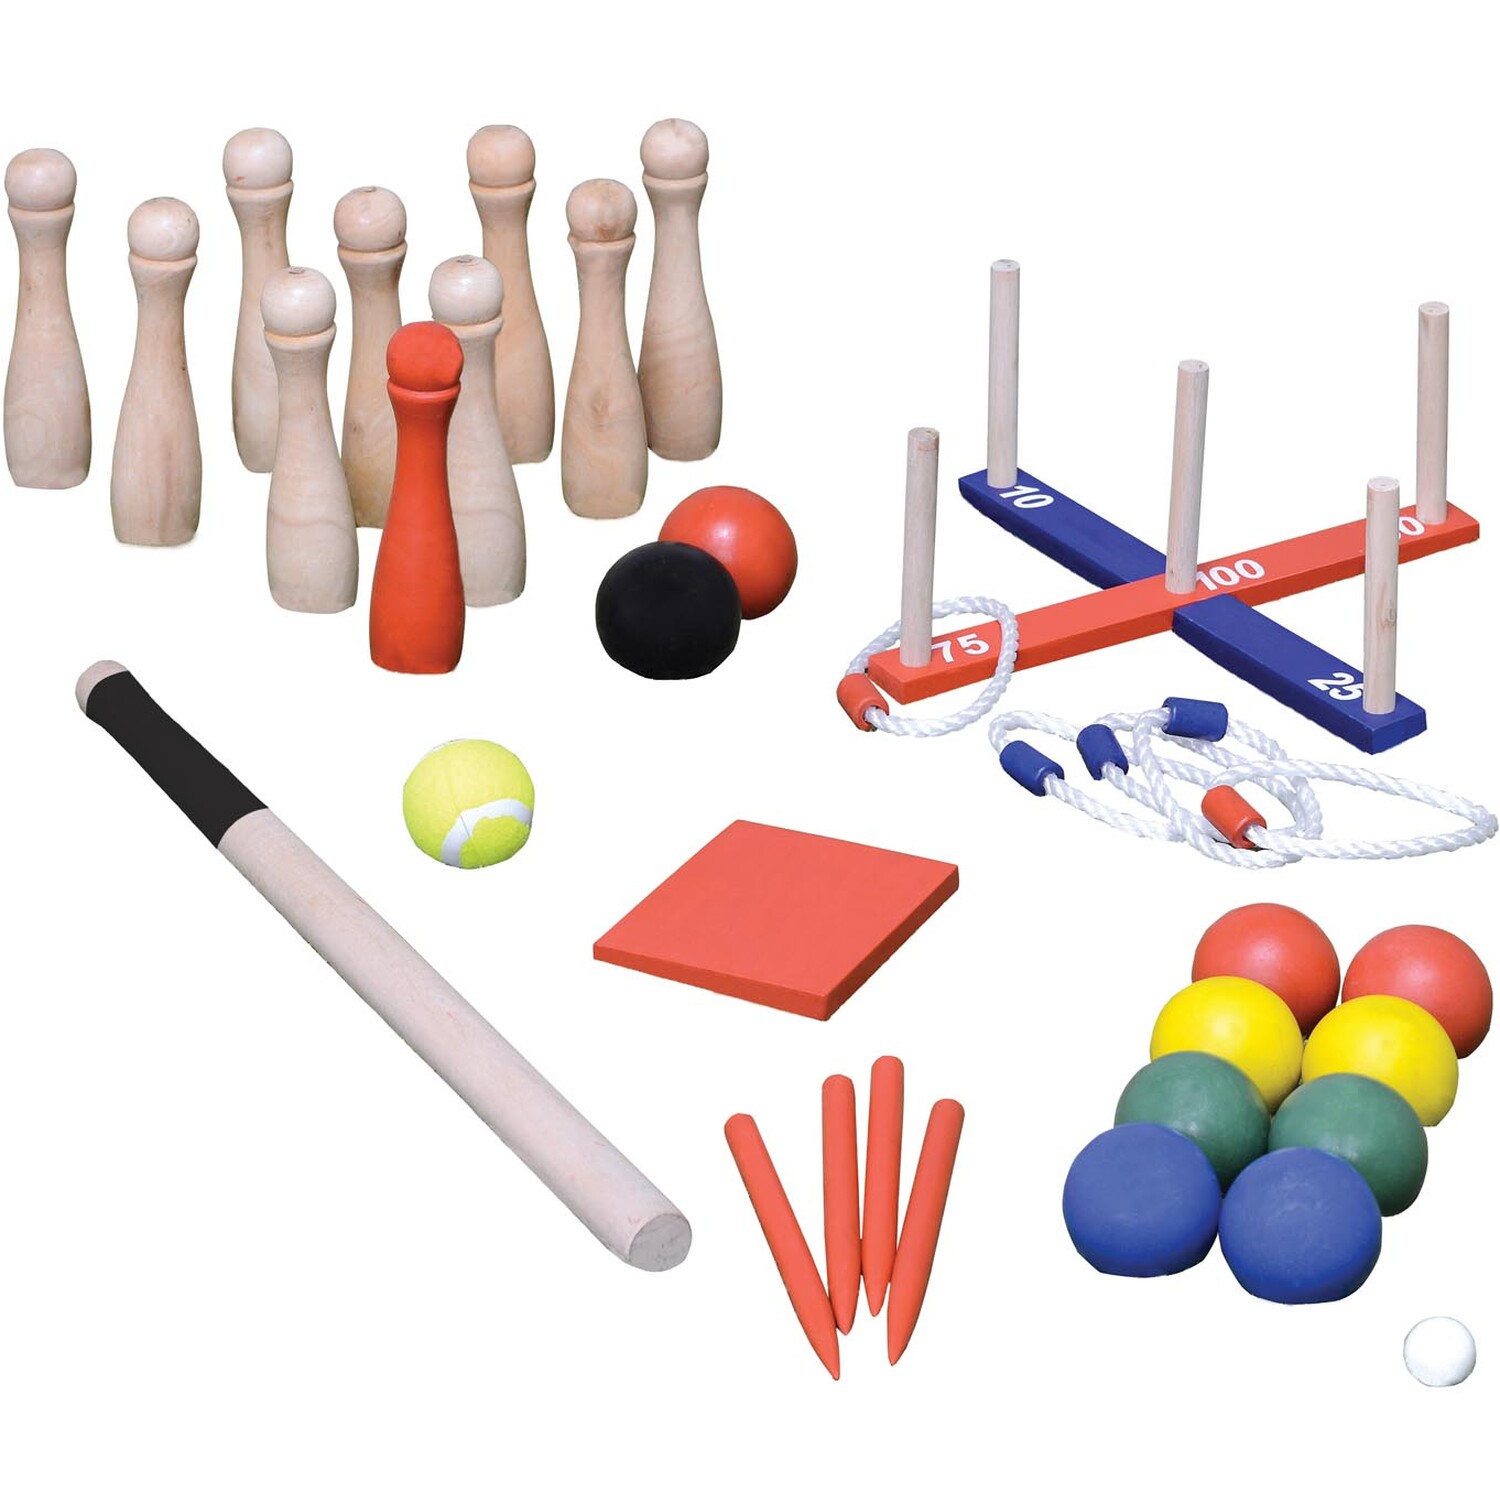 4-in-1 Wooden Games Image 1